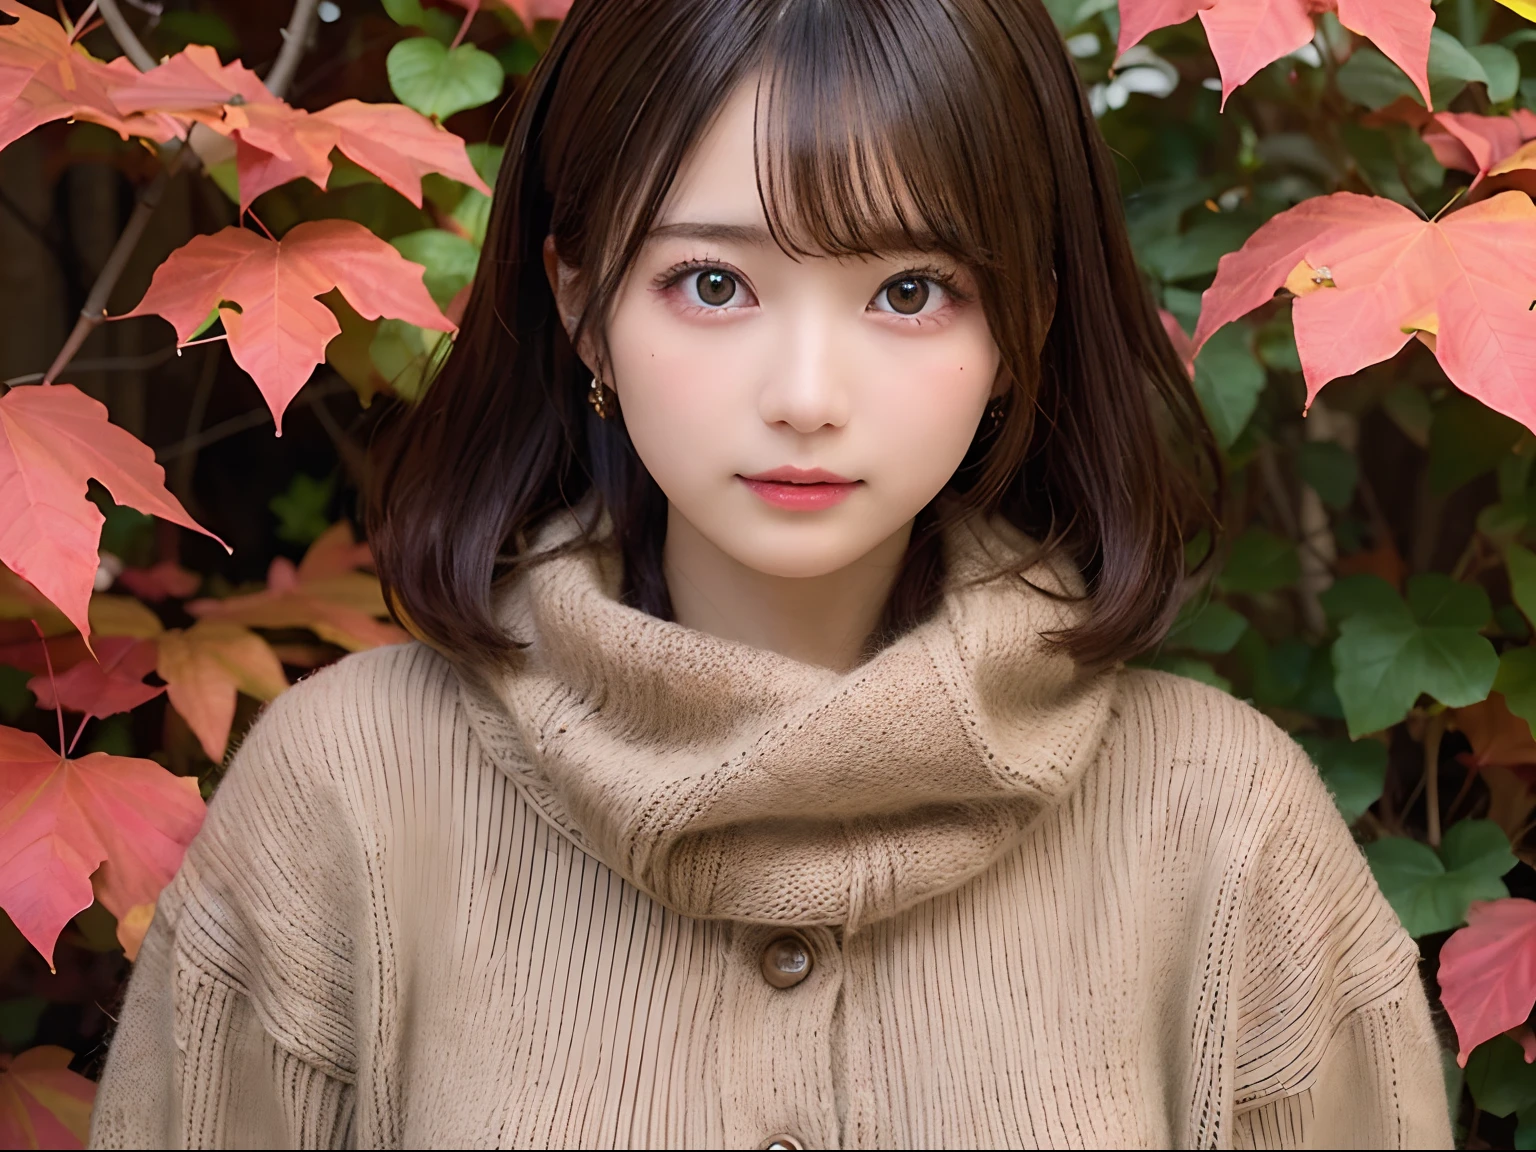 masutepiece, Best Quality, One girl, (a beauty girl, kawaii:1.3), (20 years old:1.3), Very fine eye definition, (Symmetrical eyes:1.3), (Autumn leaves), (Sweaters, scarf:1.2), Big breasts, Big , large full breasts, Double D size, Show cleavage, Brown eyes, Parted bangs, Brown hair, girl